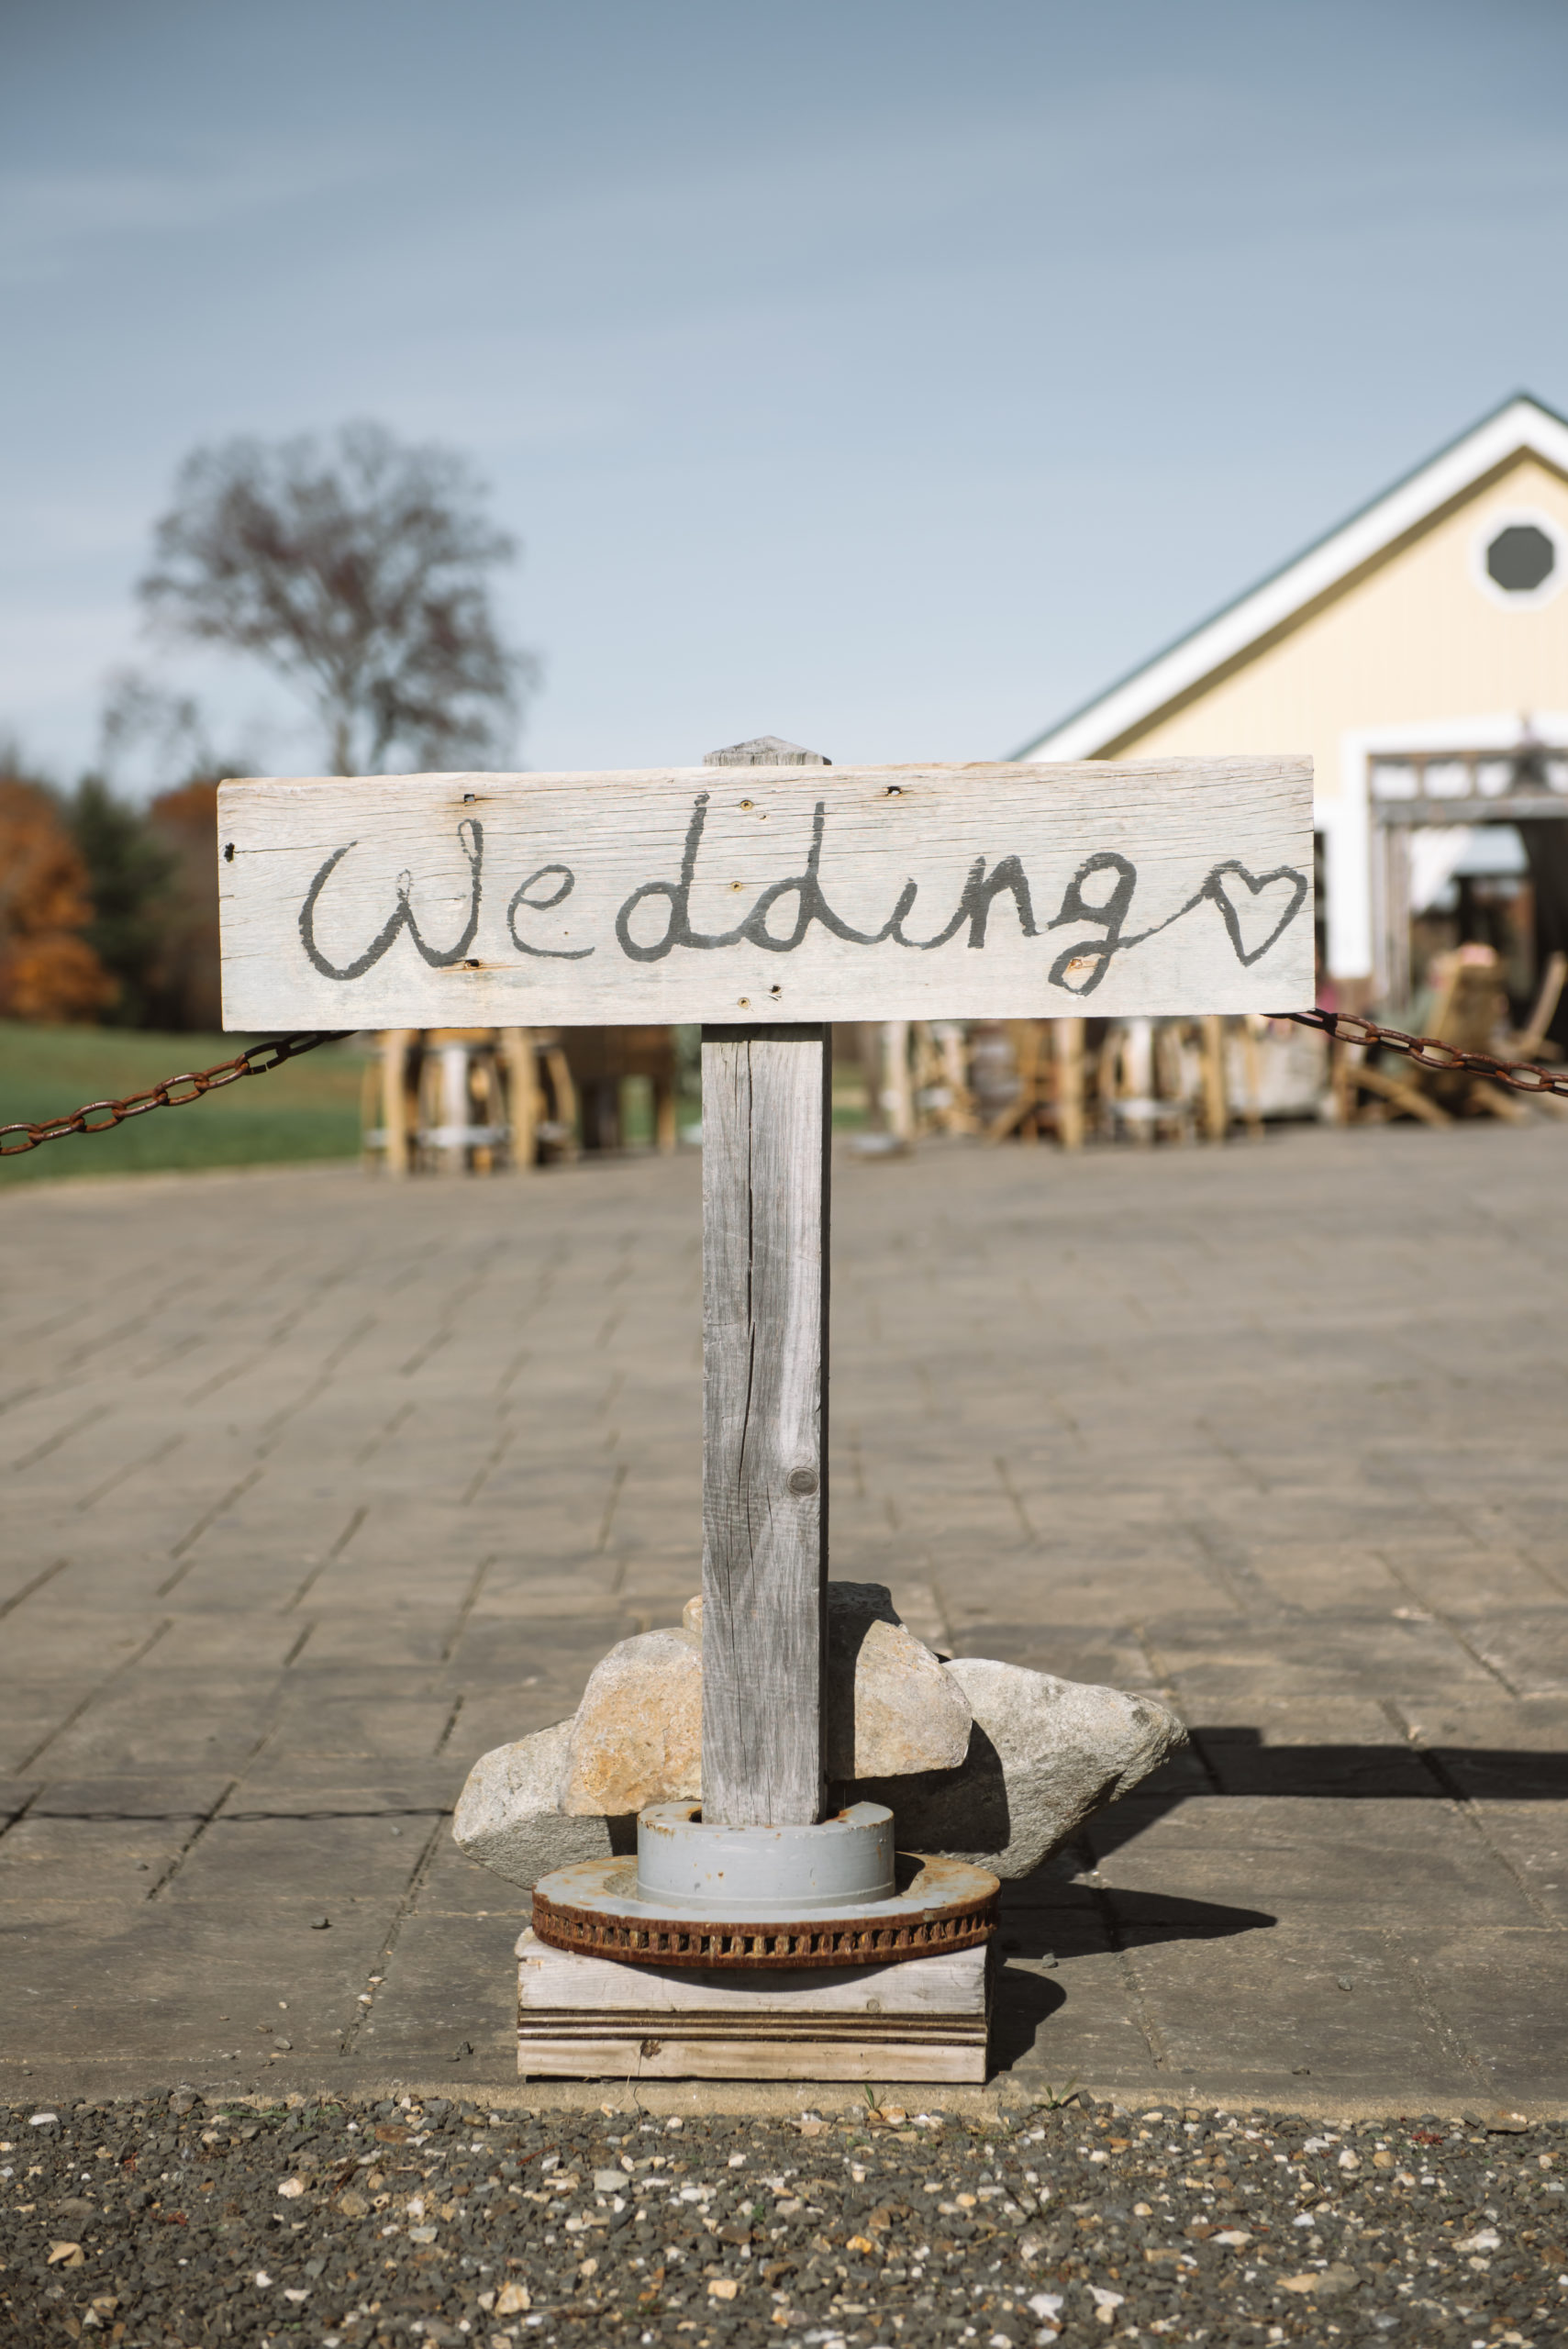 Detail of the "Wedding [illustrated hear]" wooden sign placed at the entrance of the ceremony/reception courtyard area. The ceremony location is partially visible in the background.